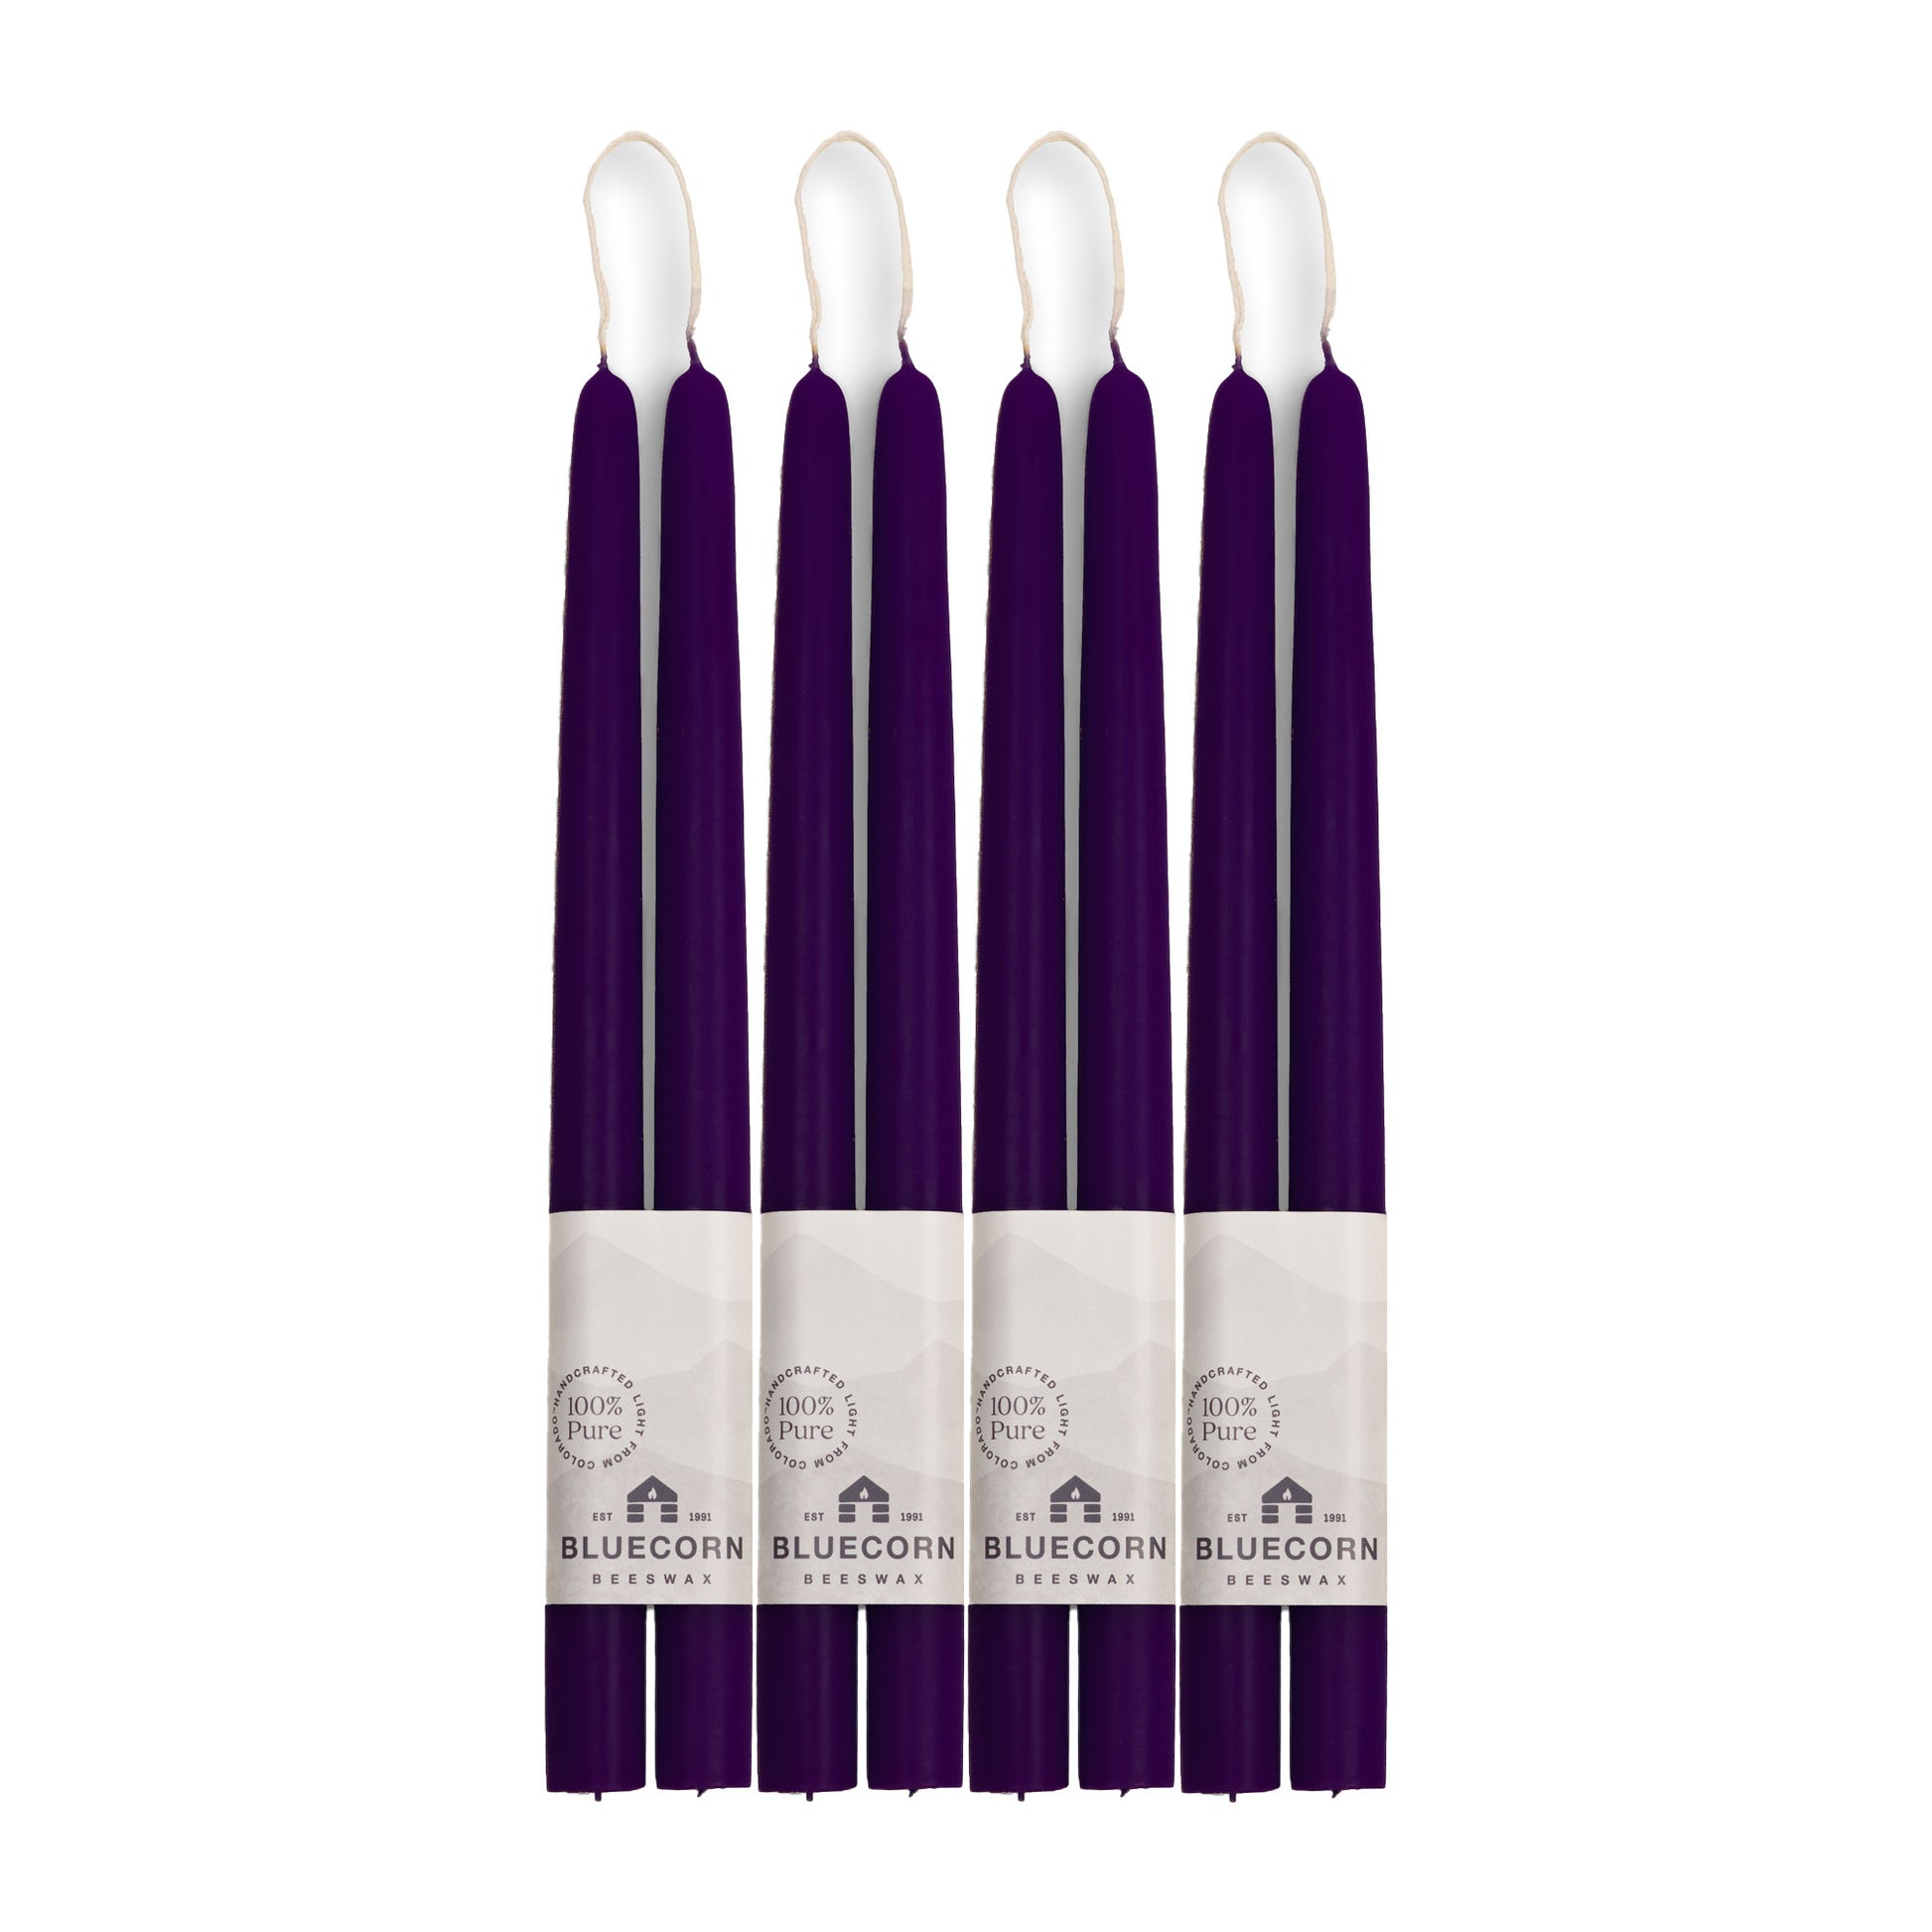 eggplant purple candles hand-dipped bluecorn beeswax taper candles